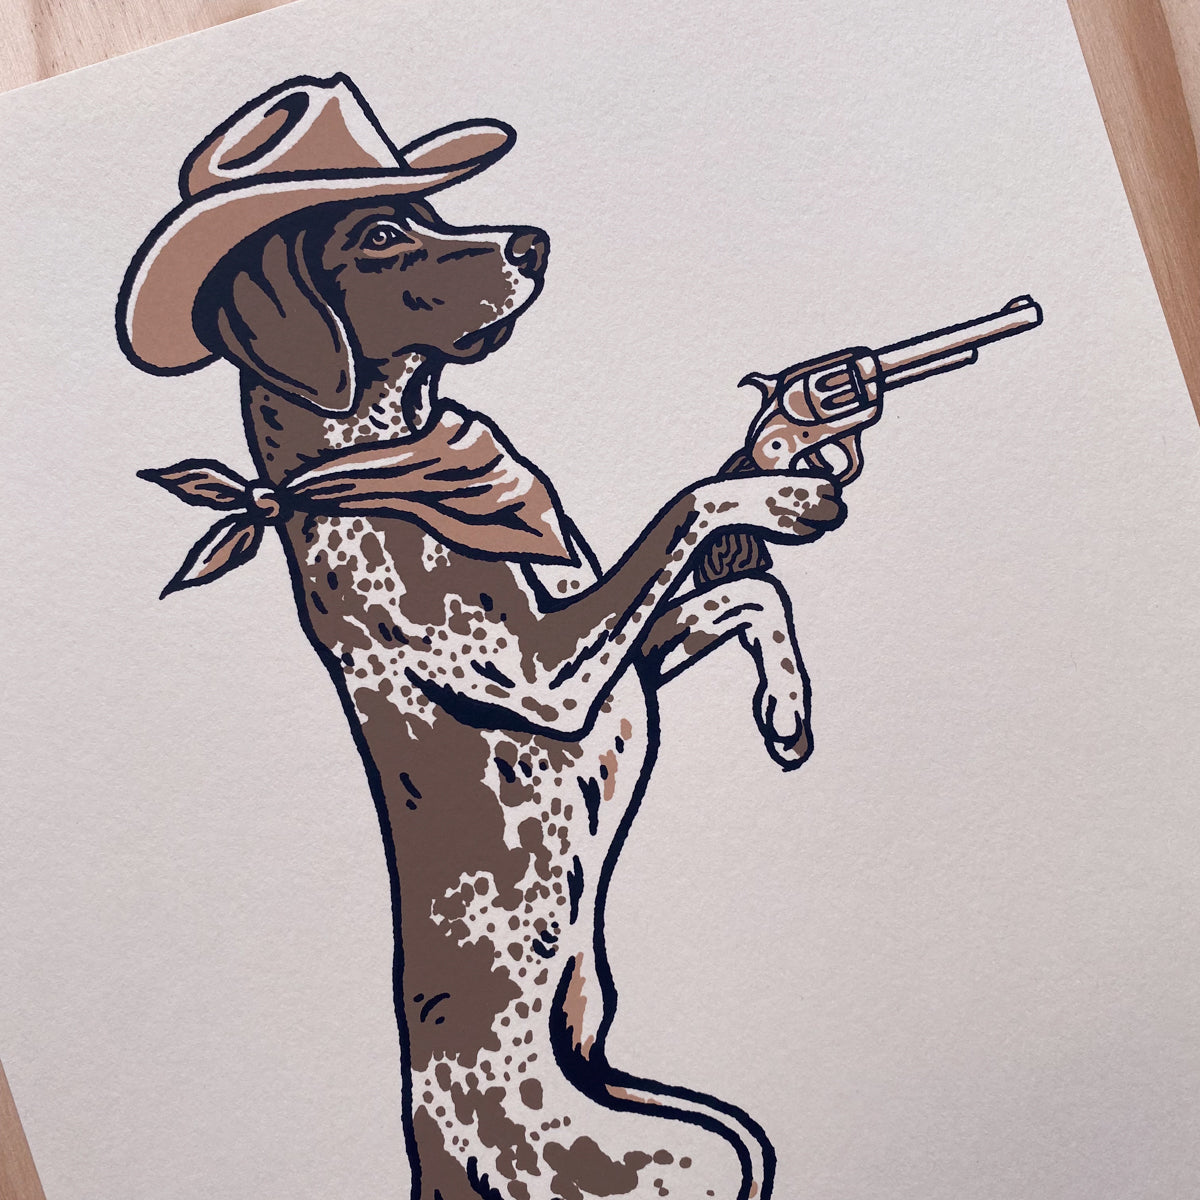 German Shorthaired Pointer Outlaw - Signed 8x10in Print #465